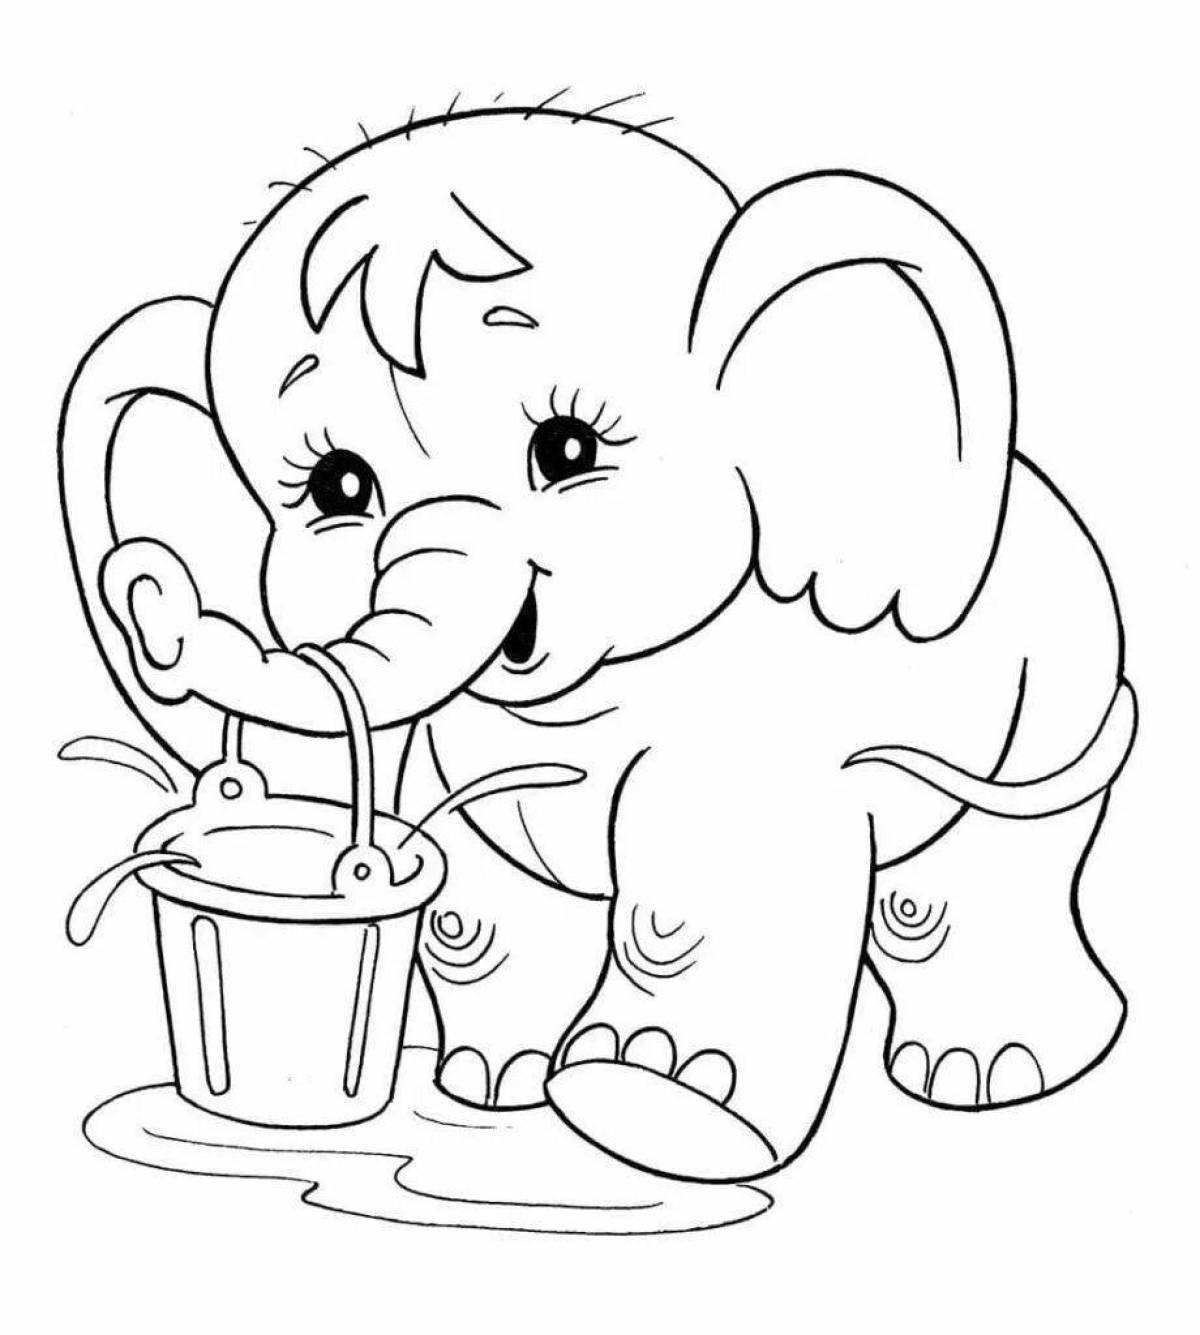 Coloring pdf for children